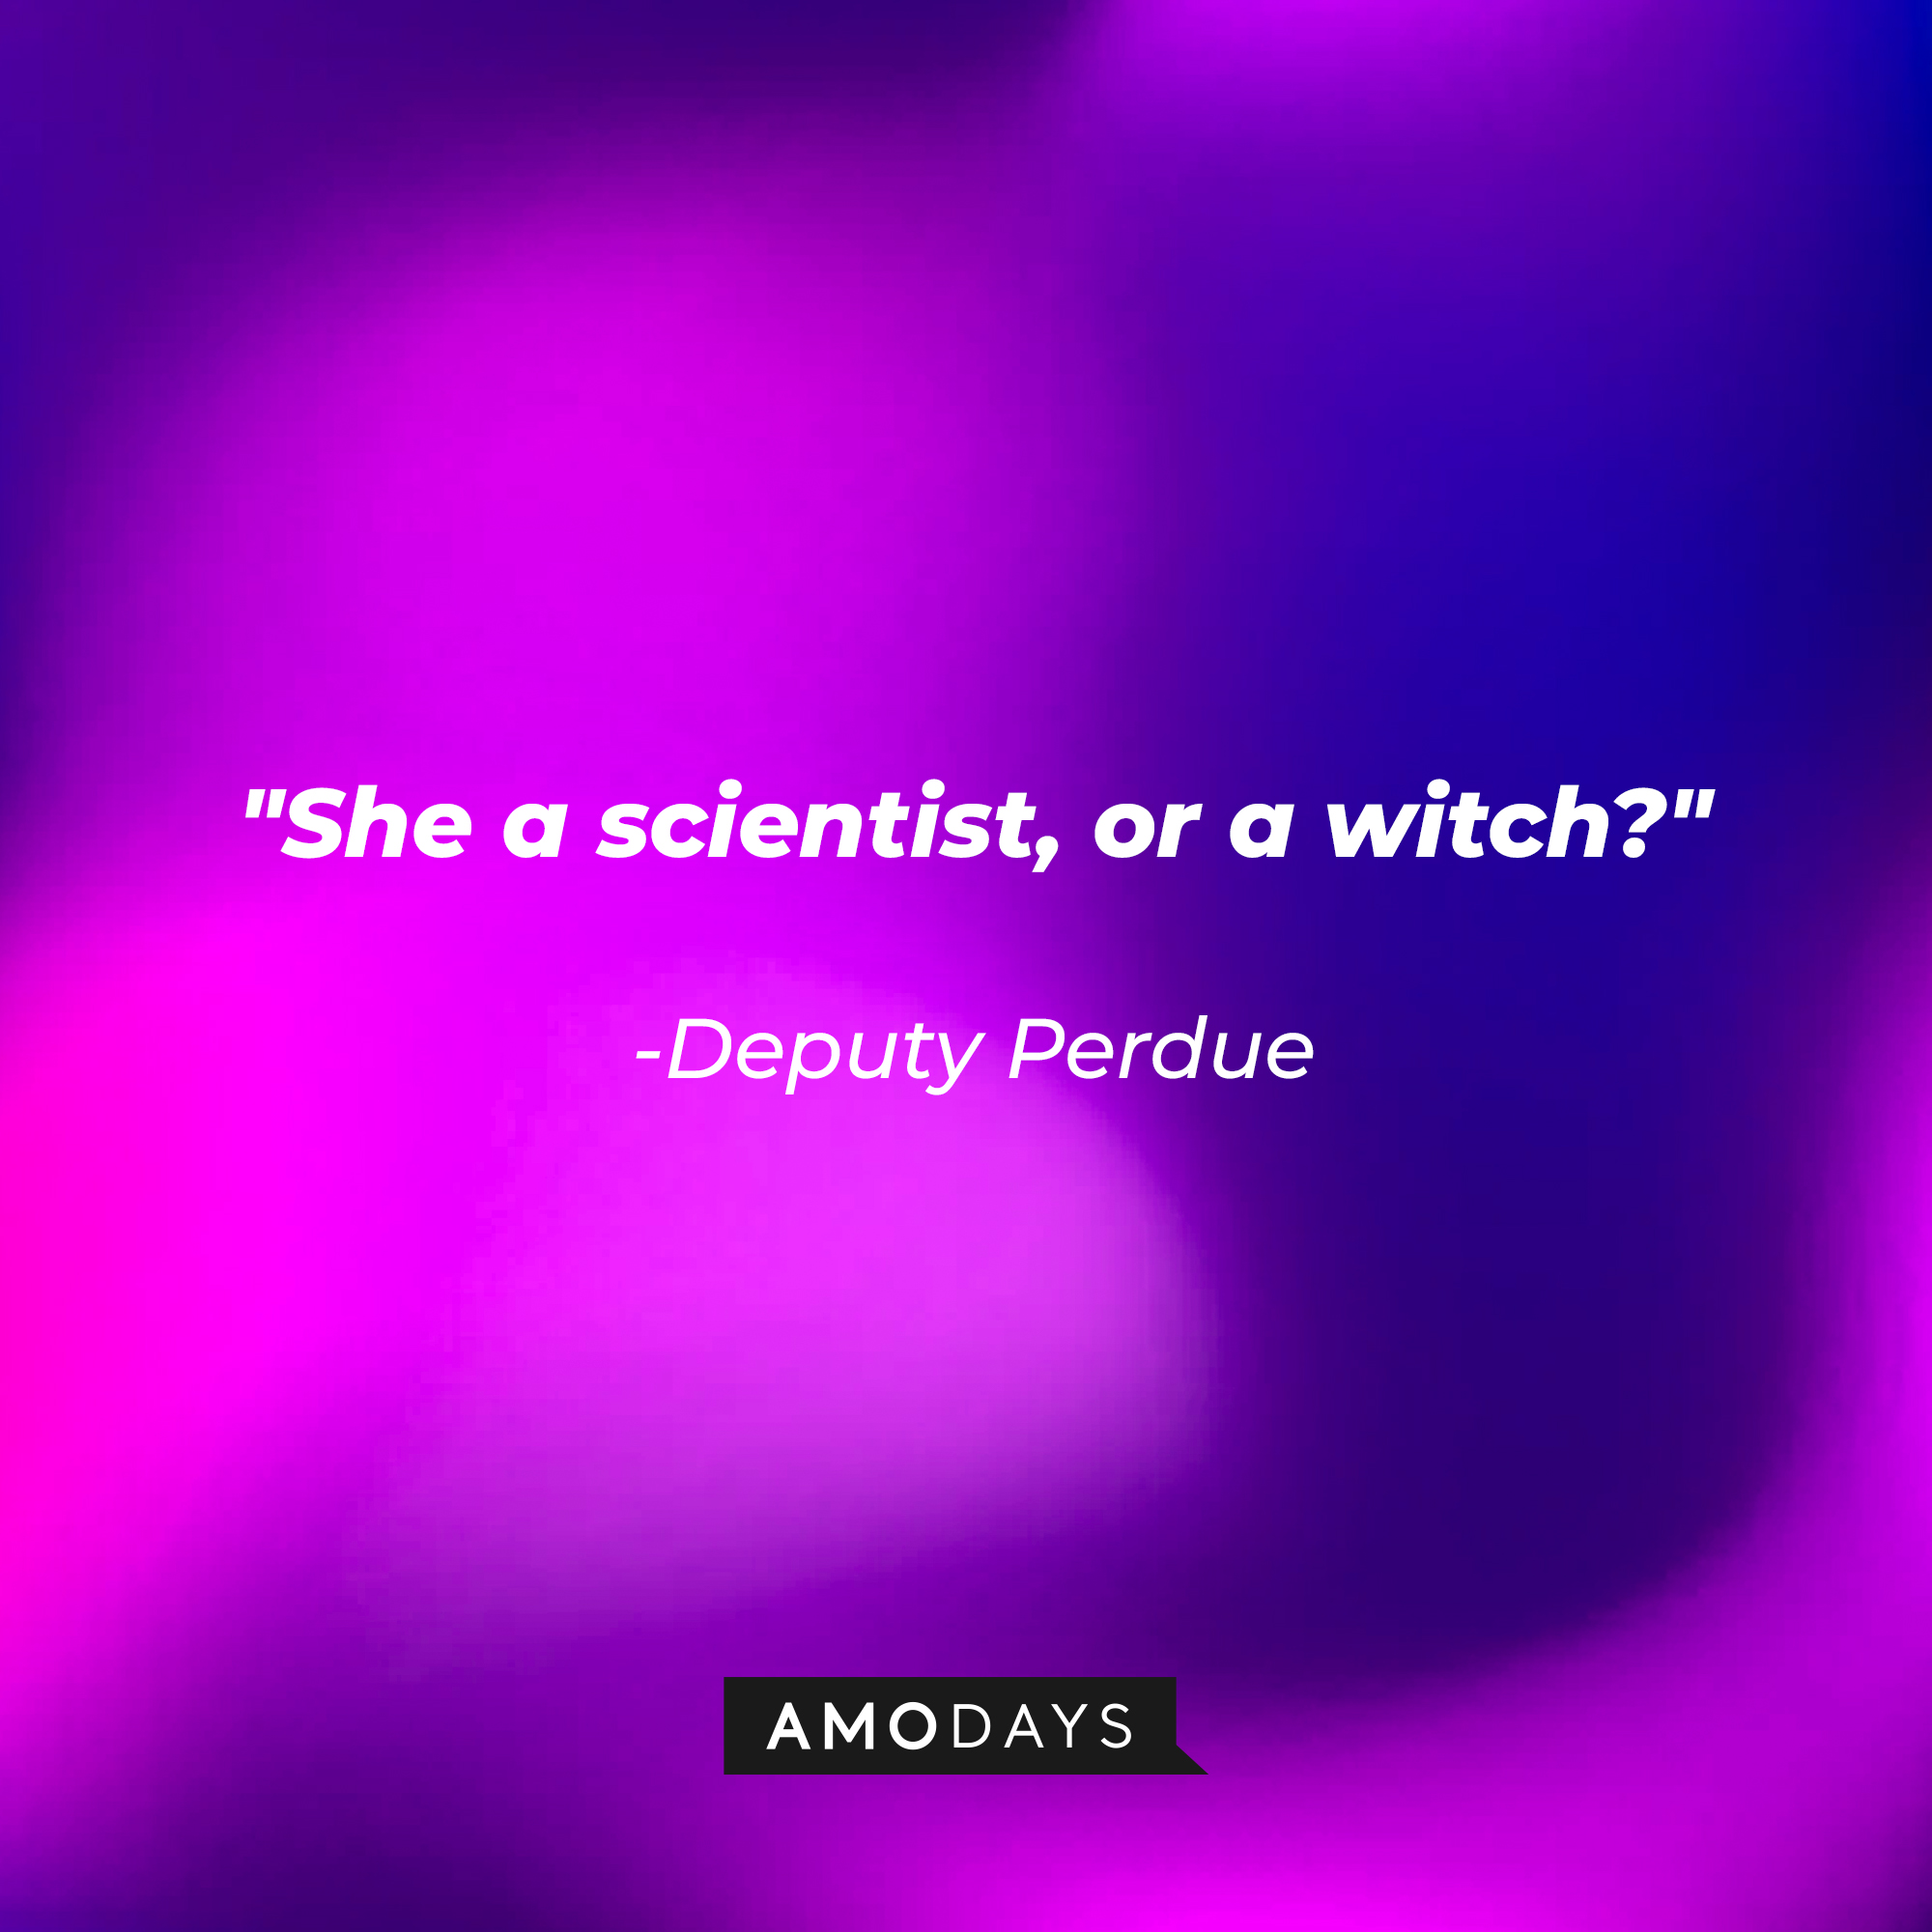 Deputy Perdue’s quote: “She a scientist, or a witch?” │ Source: AmoDays